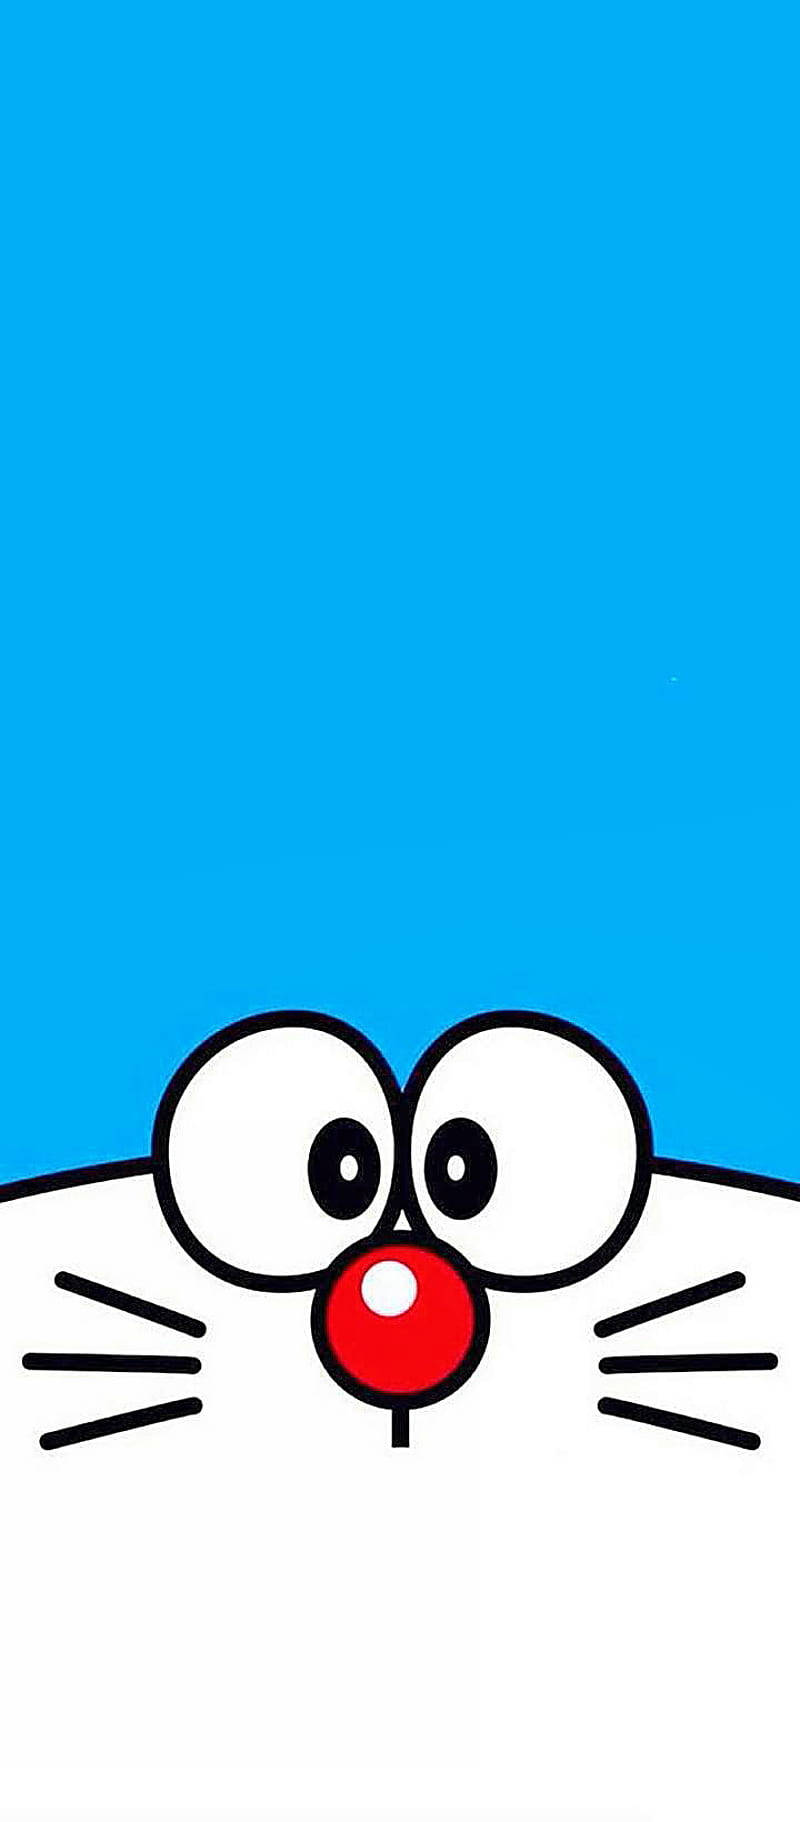 100+] Doraemon Iphone Wallpapers for FREE | Wallpapers.com